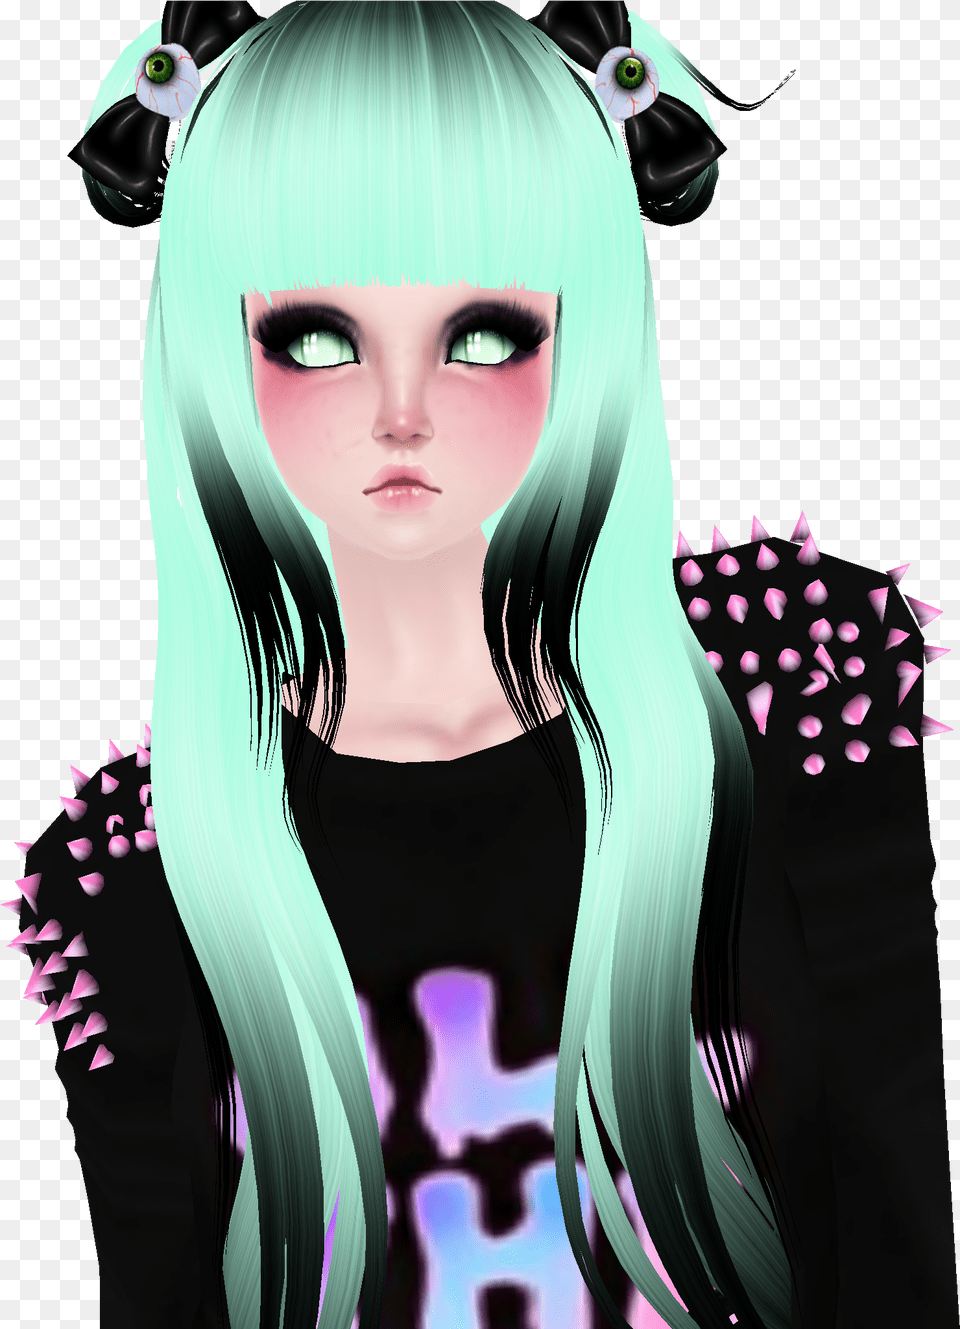 This Is A Female Imvu Pastel Goth Hair Style Mint And Imvu Pastel Goth, Publication, Book, Comics, Adult Free Transparent Png